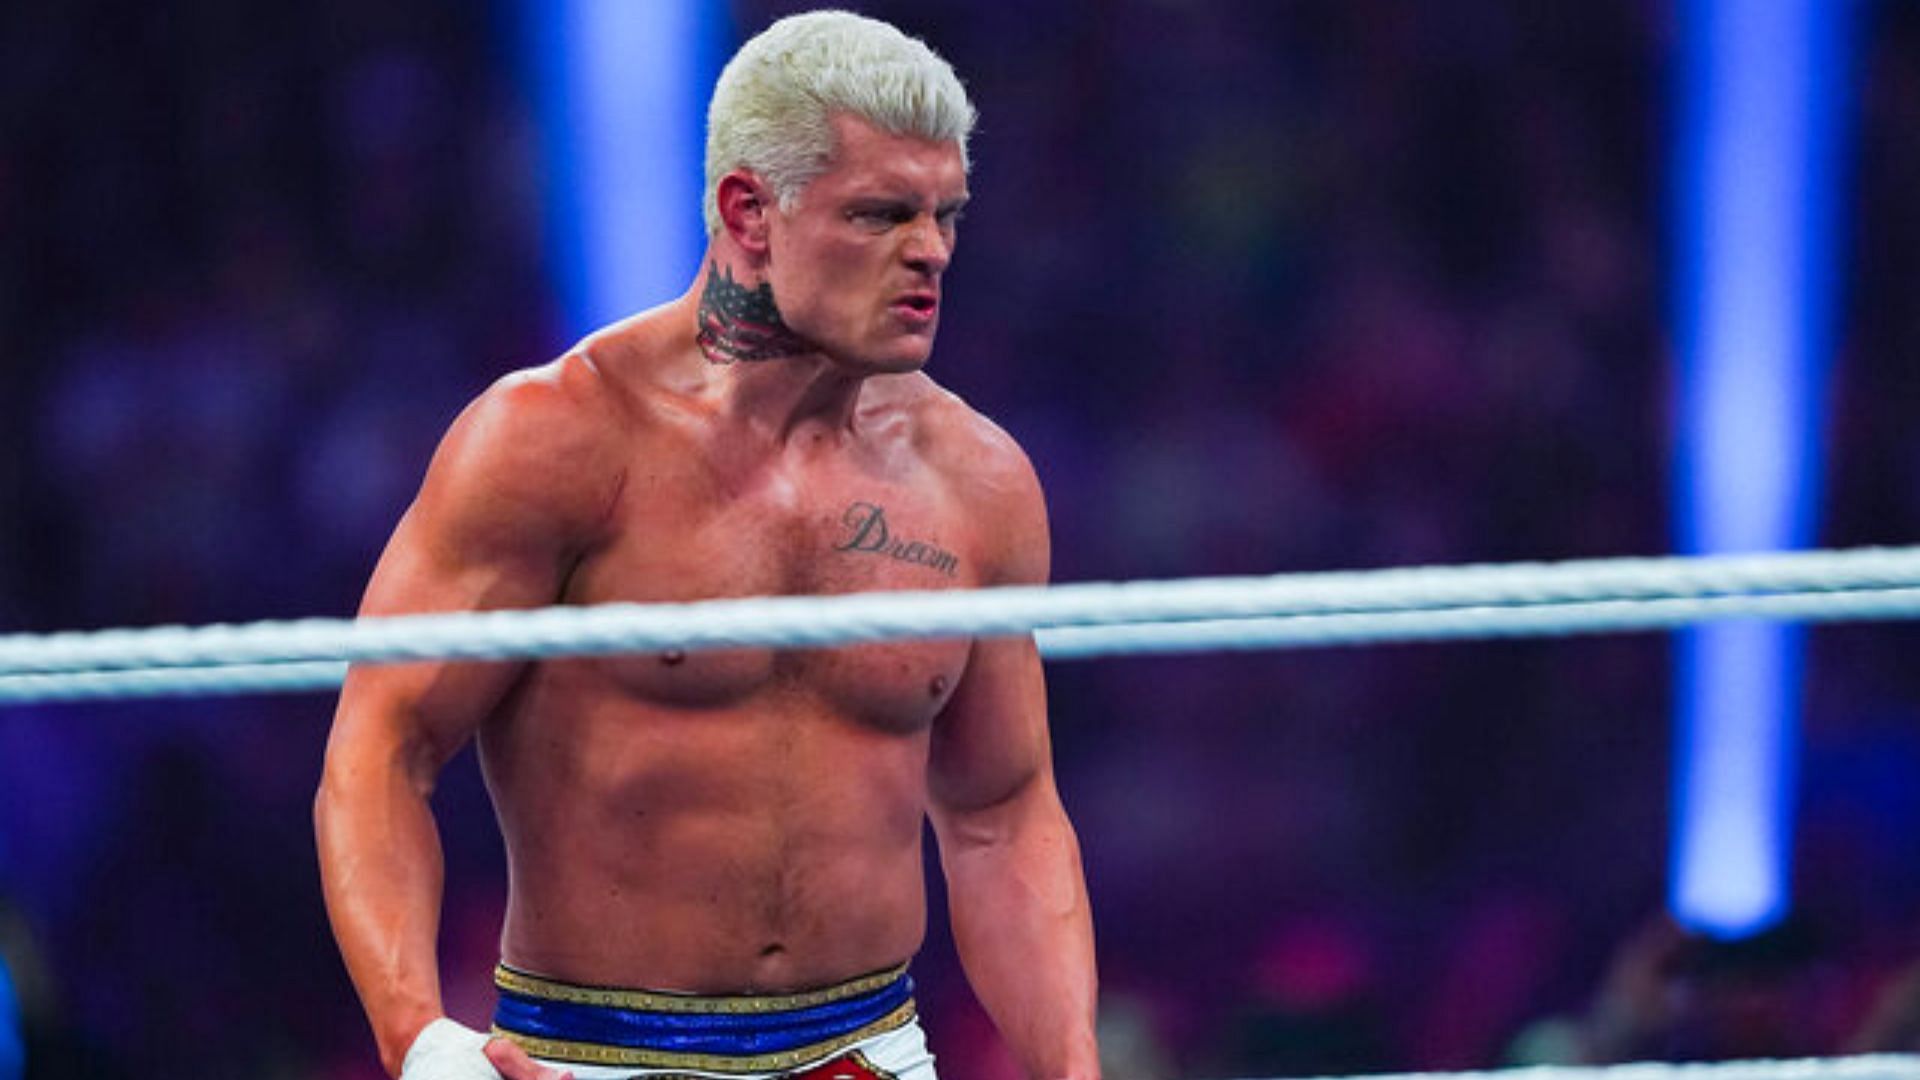 Cody Rhodes will be raring to go after the world title